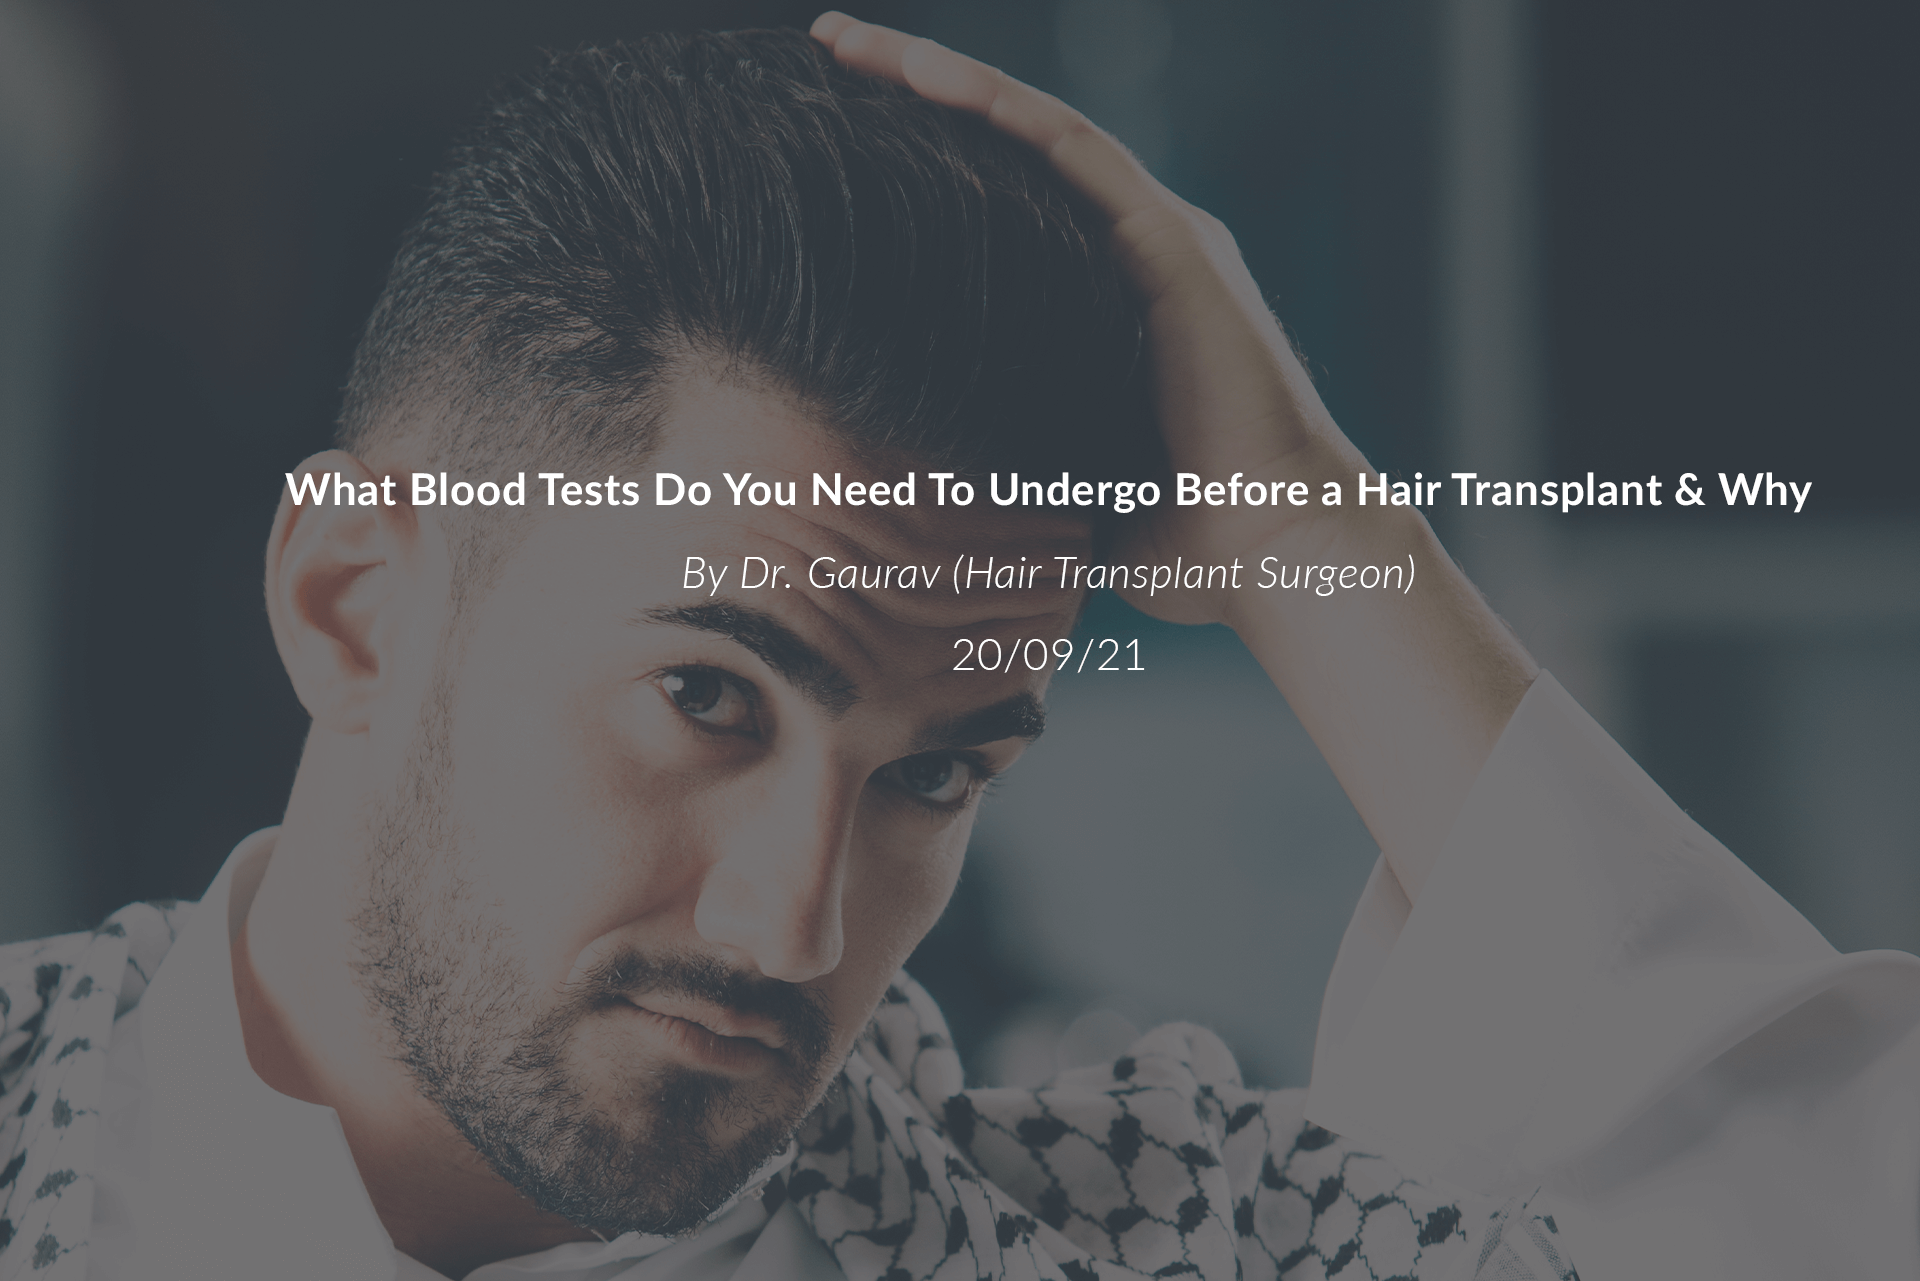 What Blood Tests Do You Need To Undergo Before a Hair Transplant & Why?